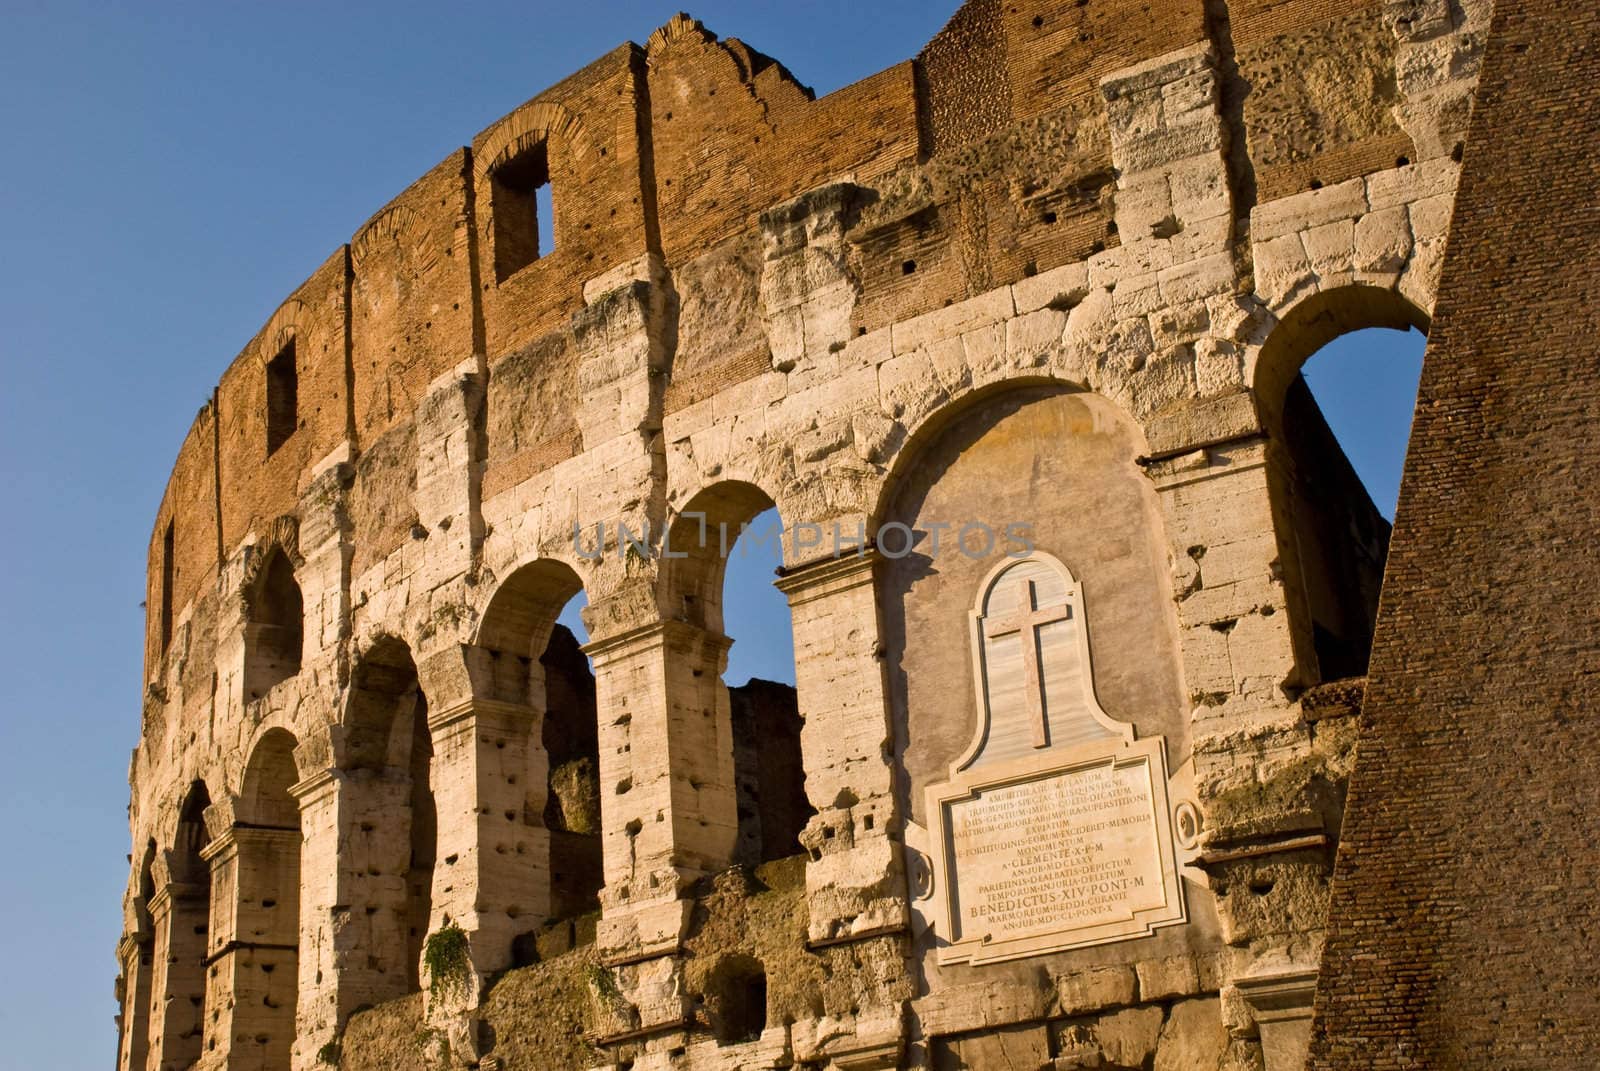 Lateral view of the Colosseum Amphitheater in Rome against blue sky background.